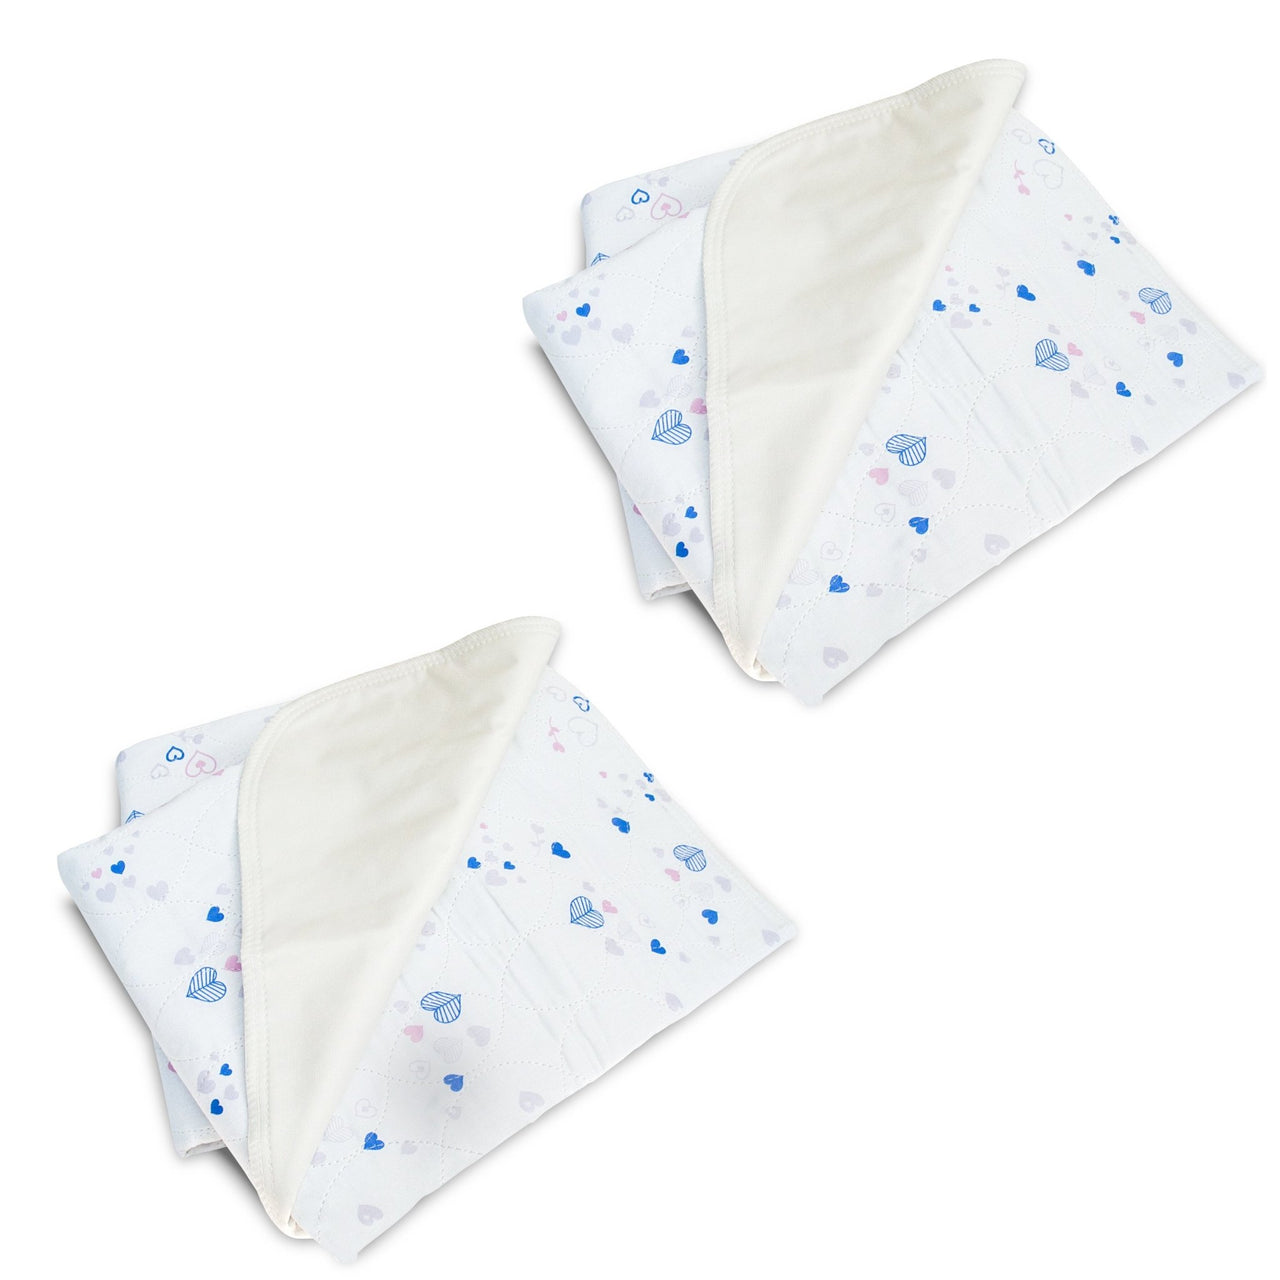 Waterproof Bed Pad with Heart and Flower Design (2 Pack)